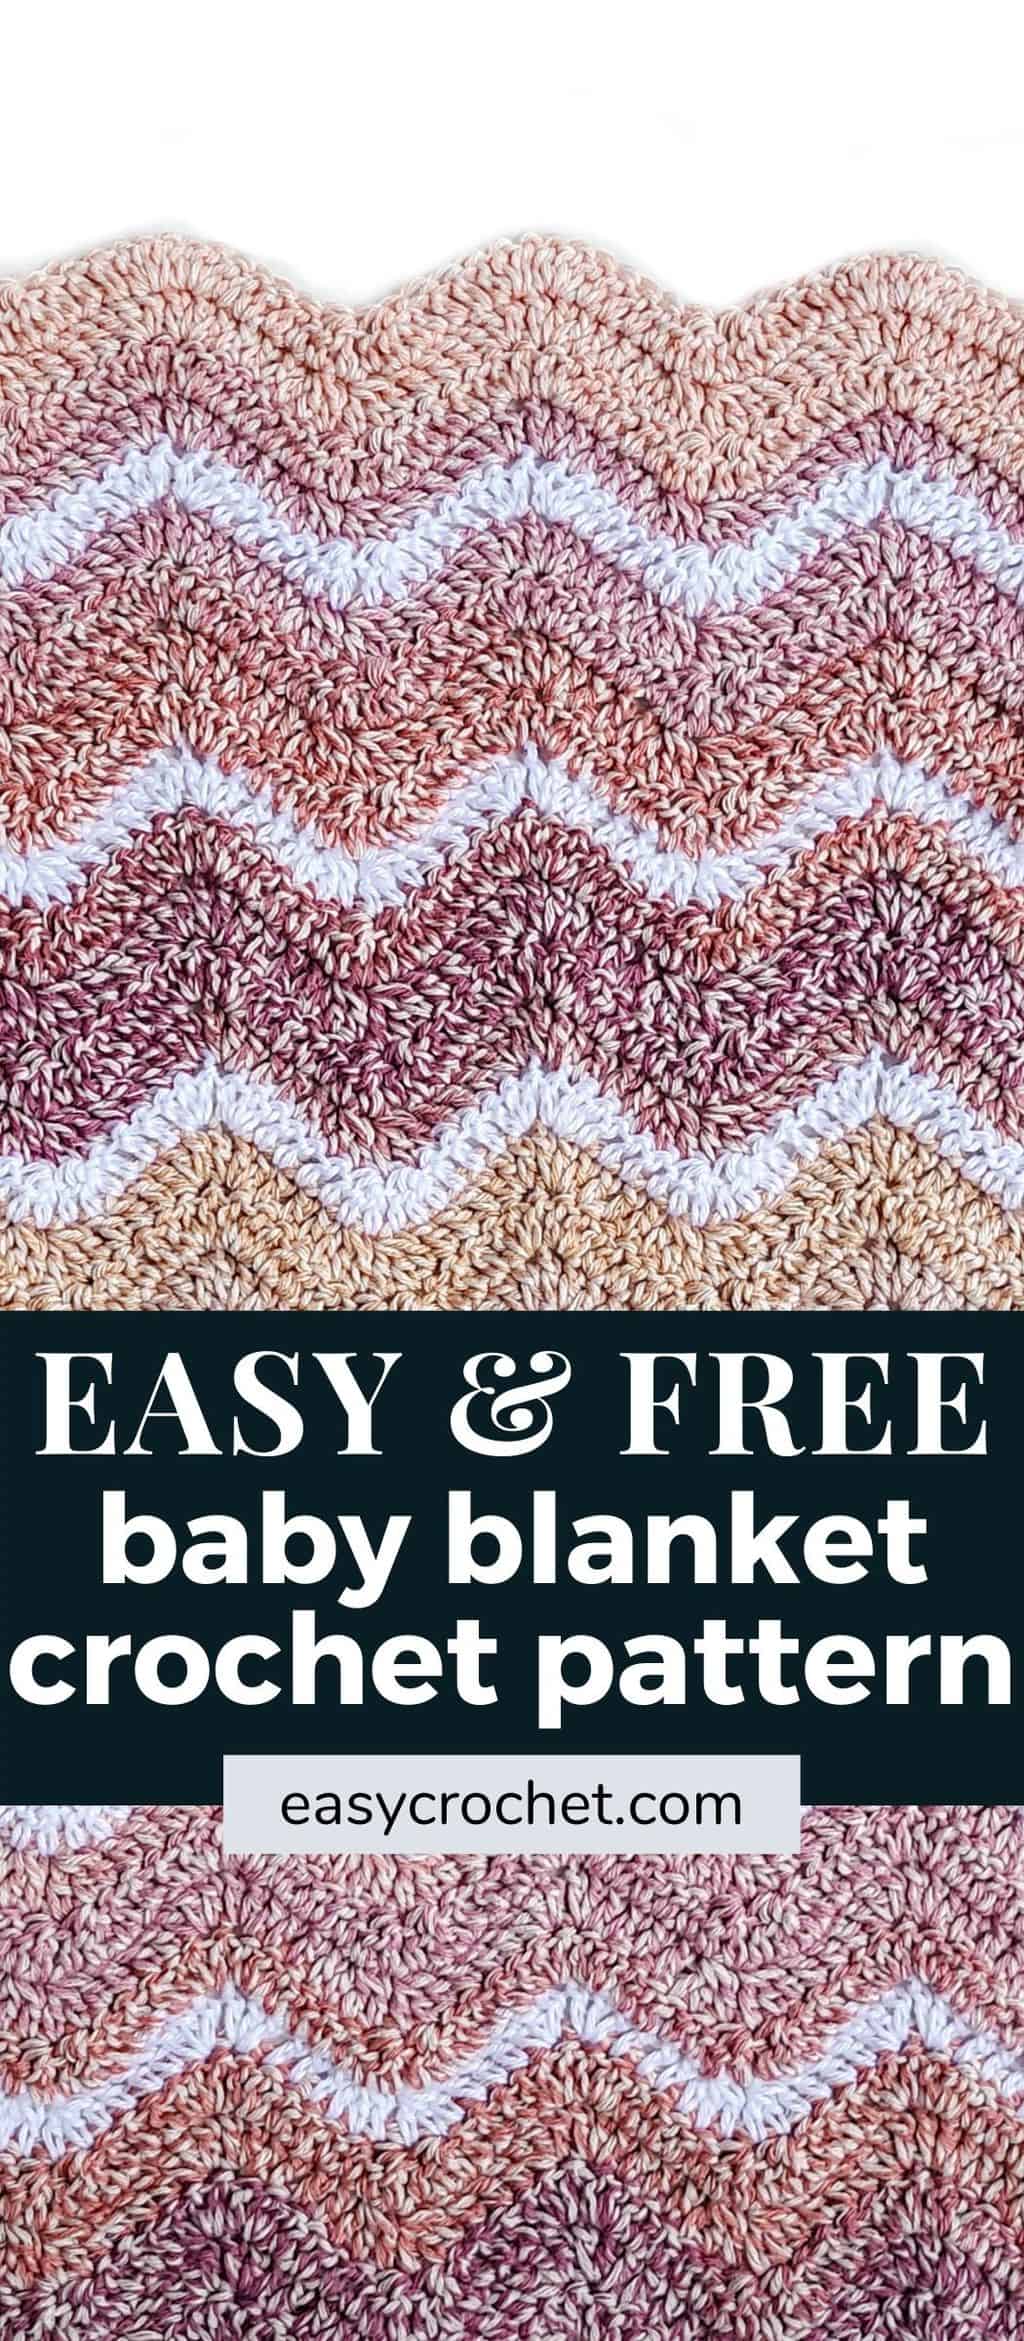 Learn how to crochet this ripple crochet baby blanket pattern with our free pattern! via @easycrochetcom